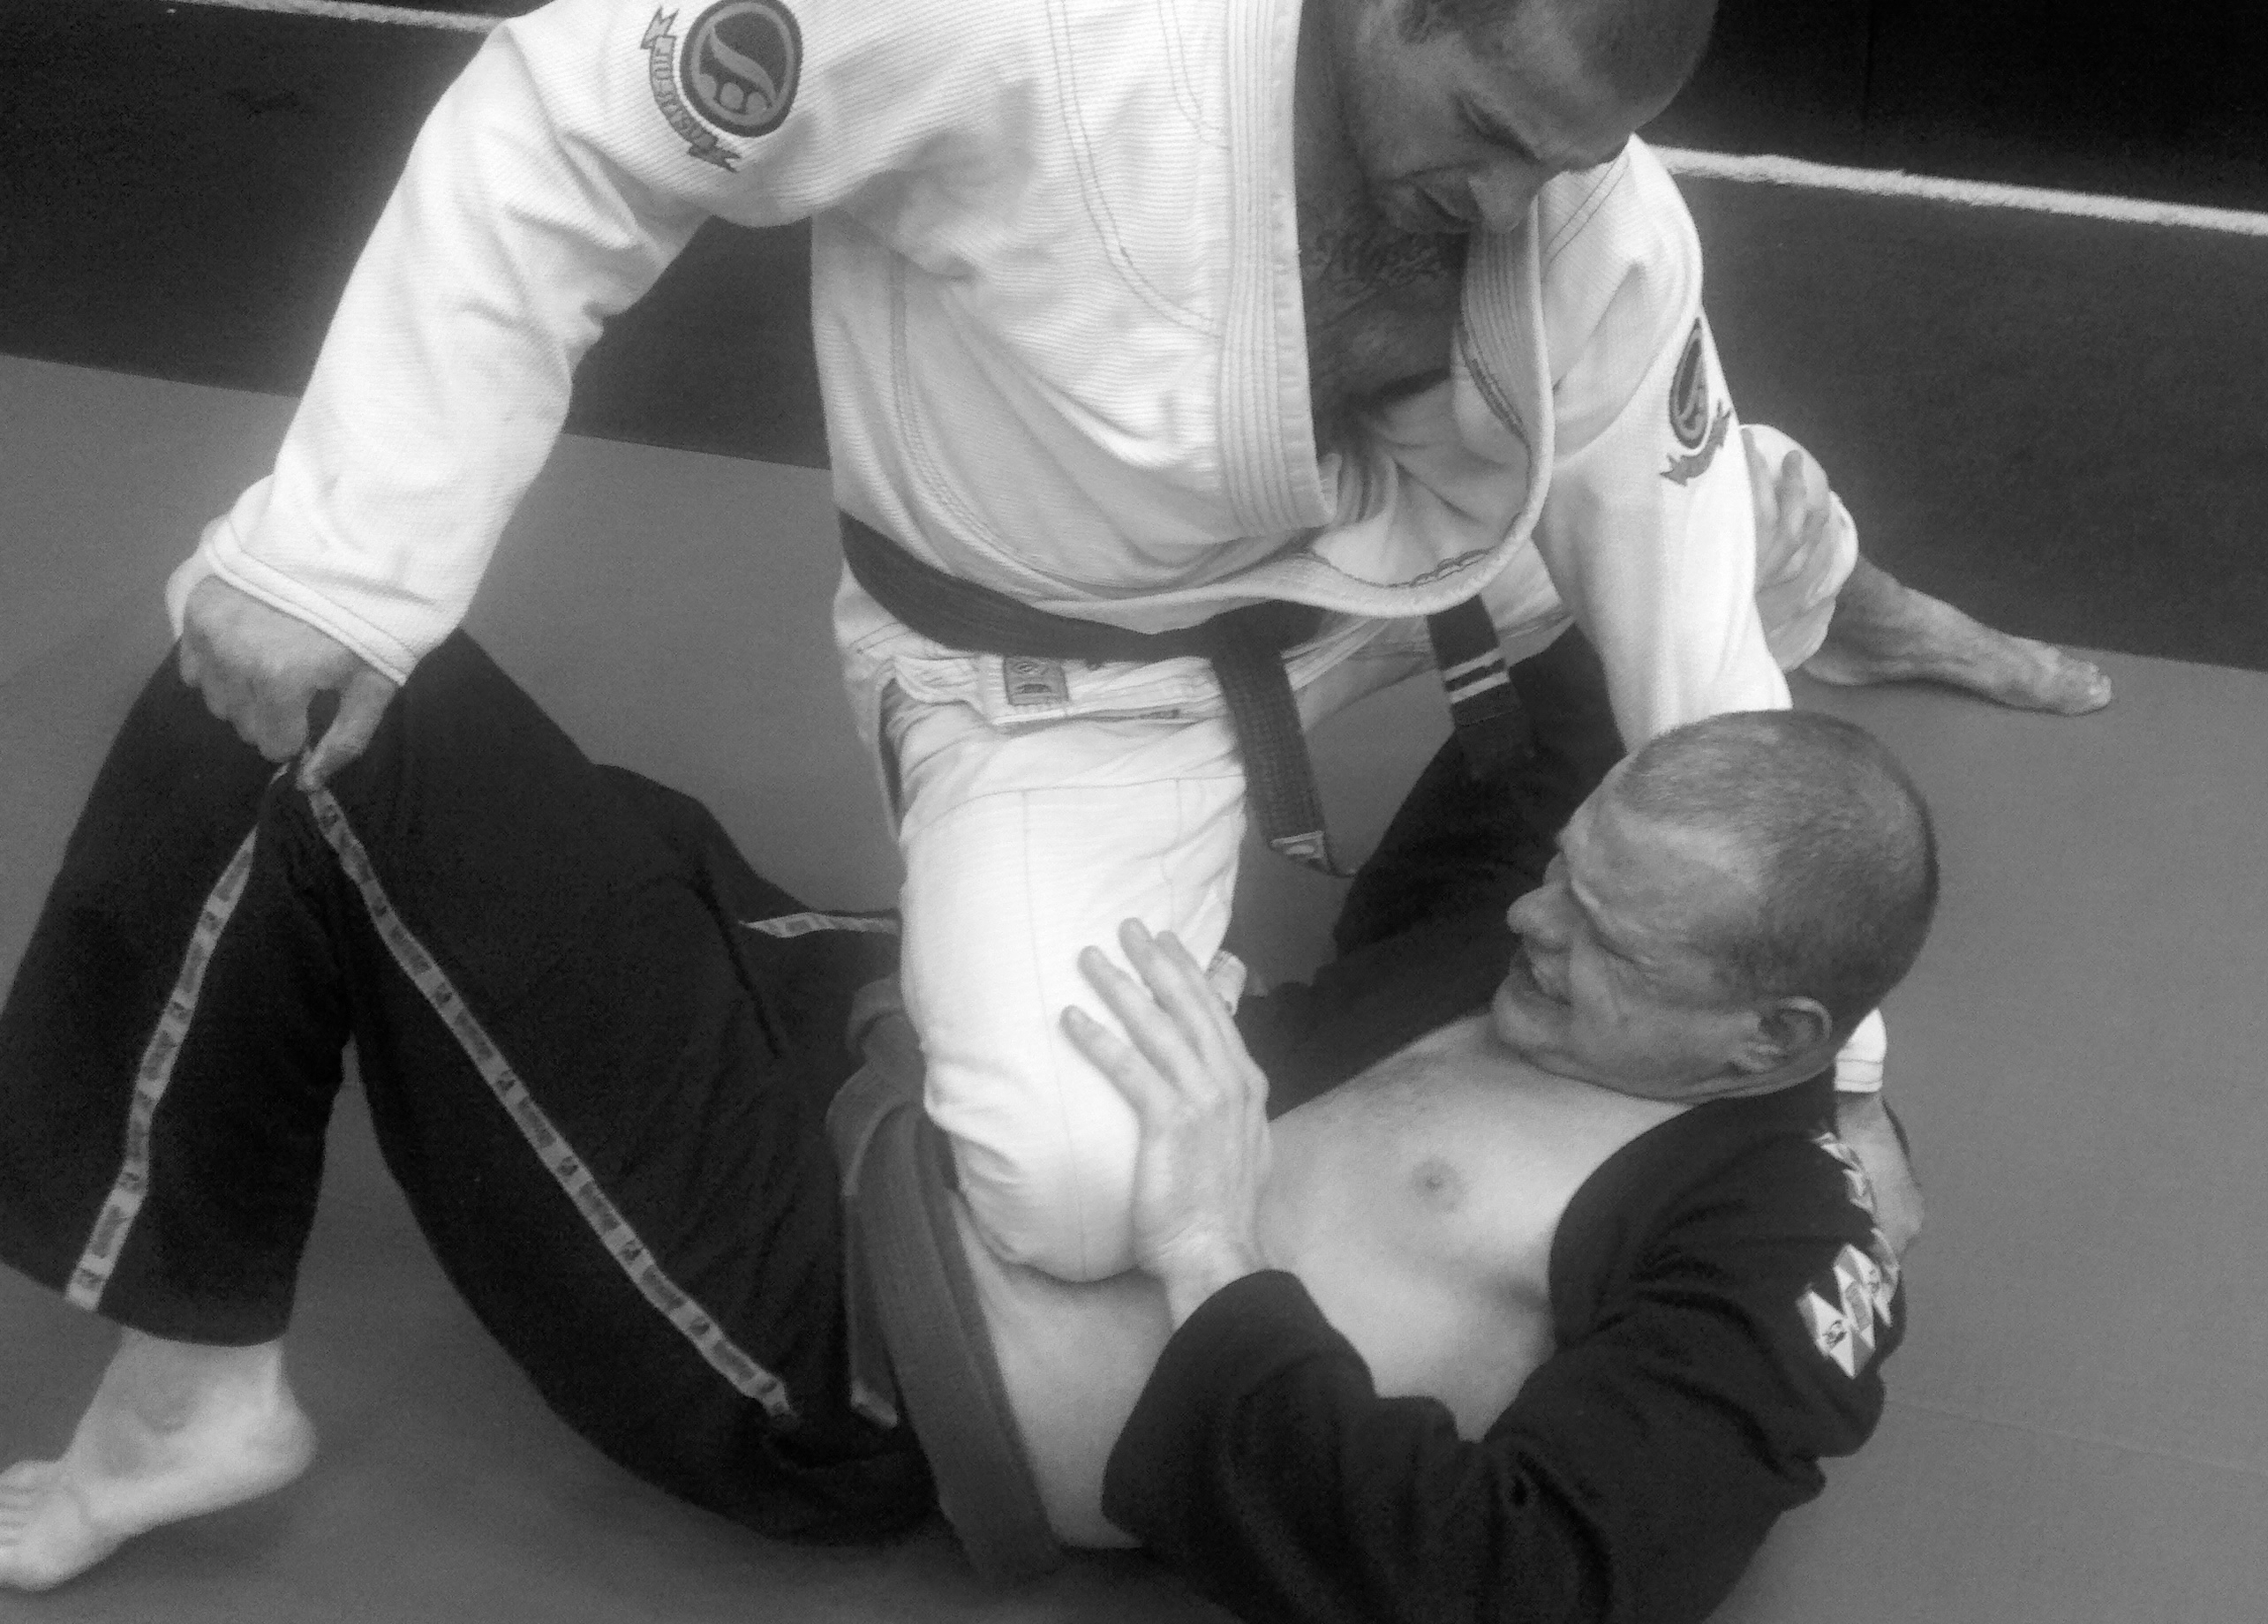 Here’s Why The Knee On Belly Position Is So Dominant